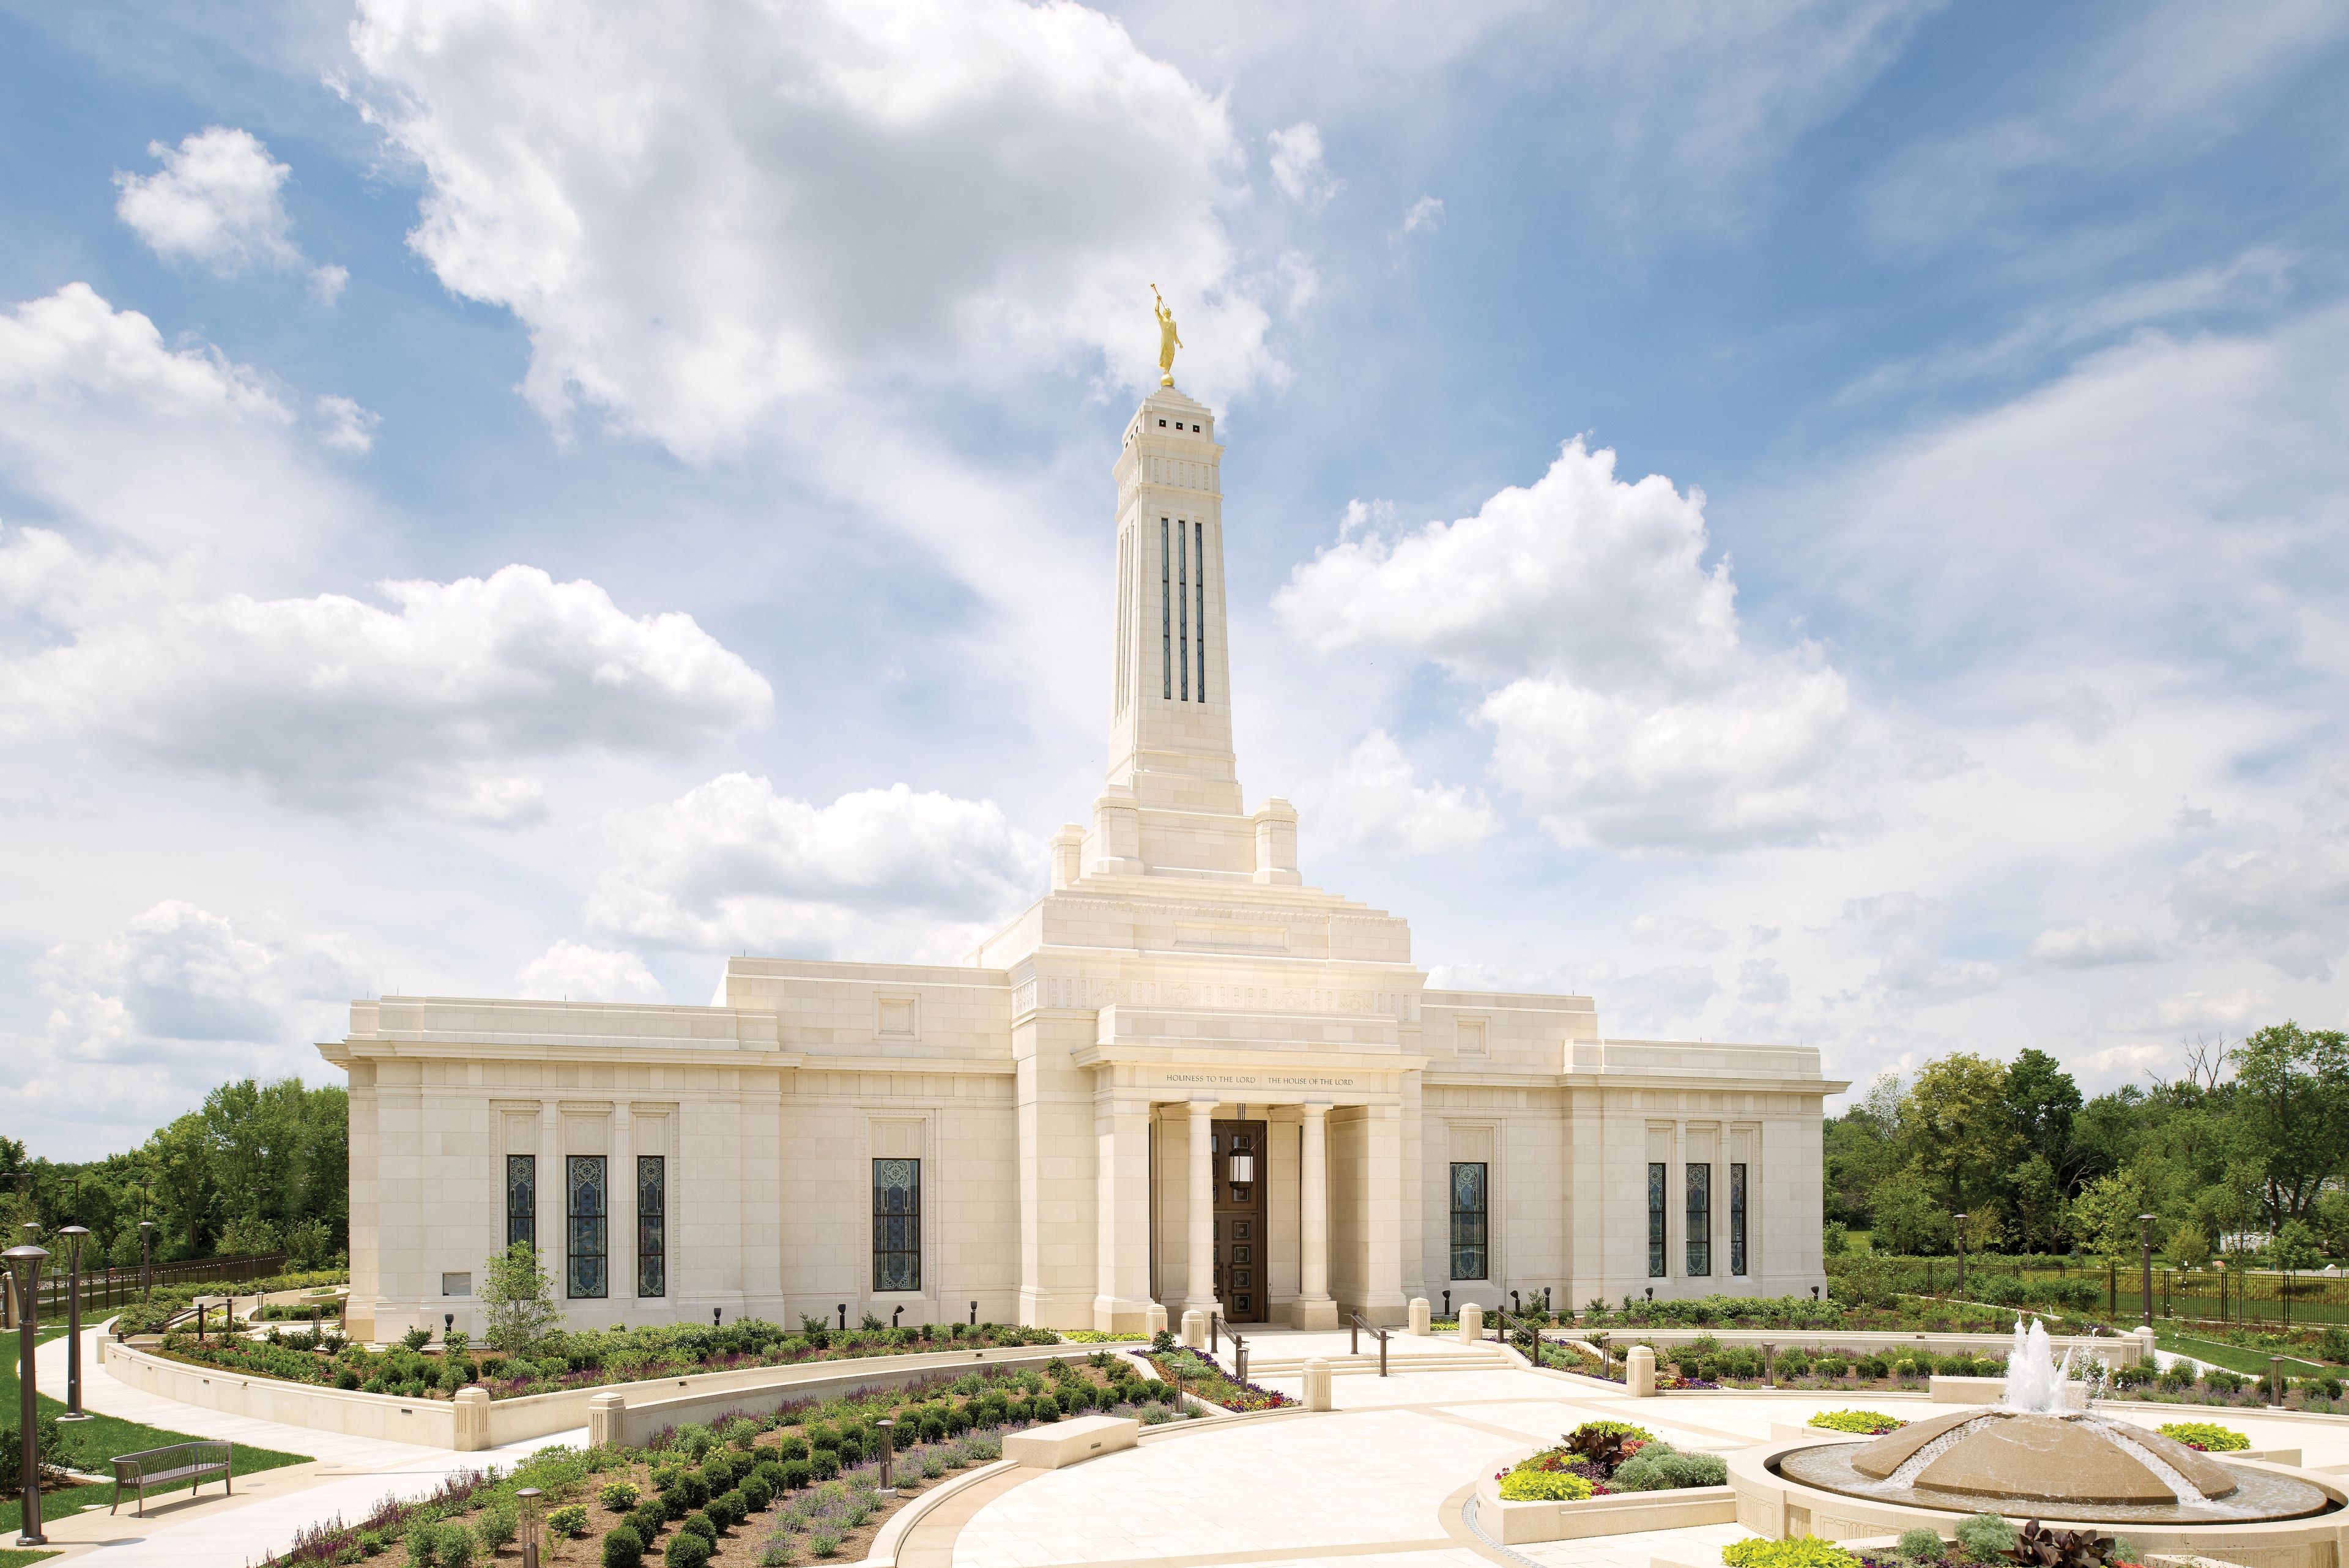 A landscape view of the Indianapolis Indiana Temple in the daytime.